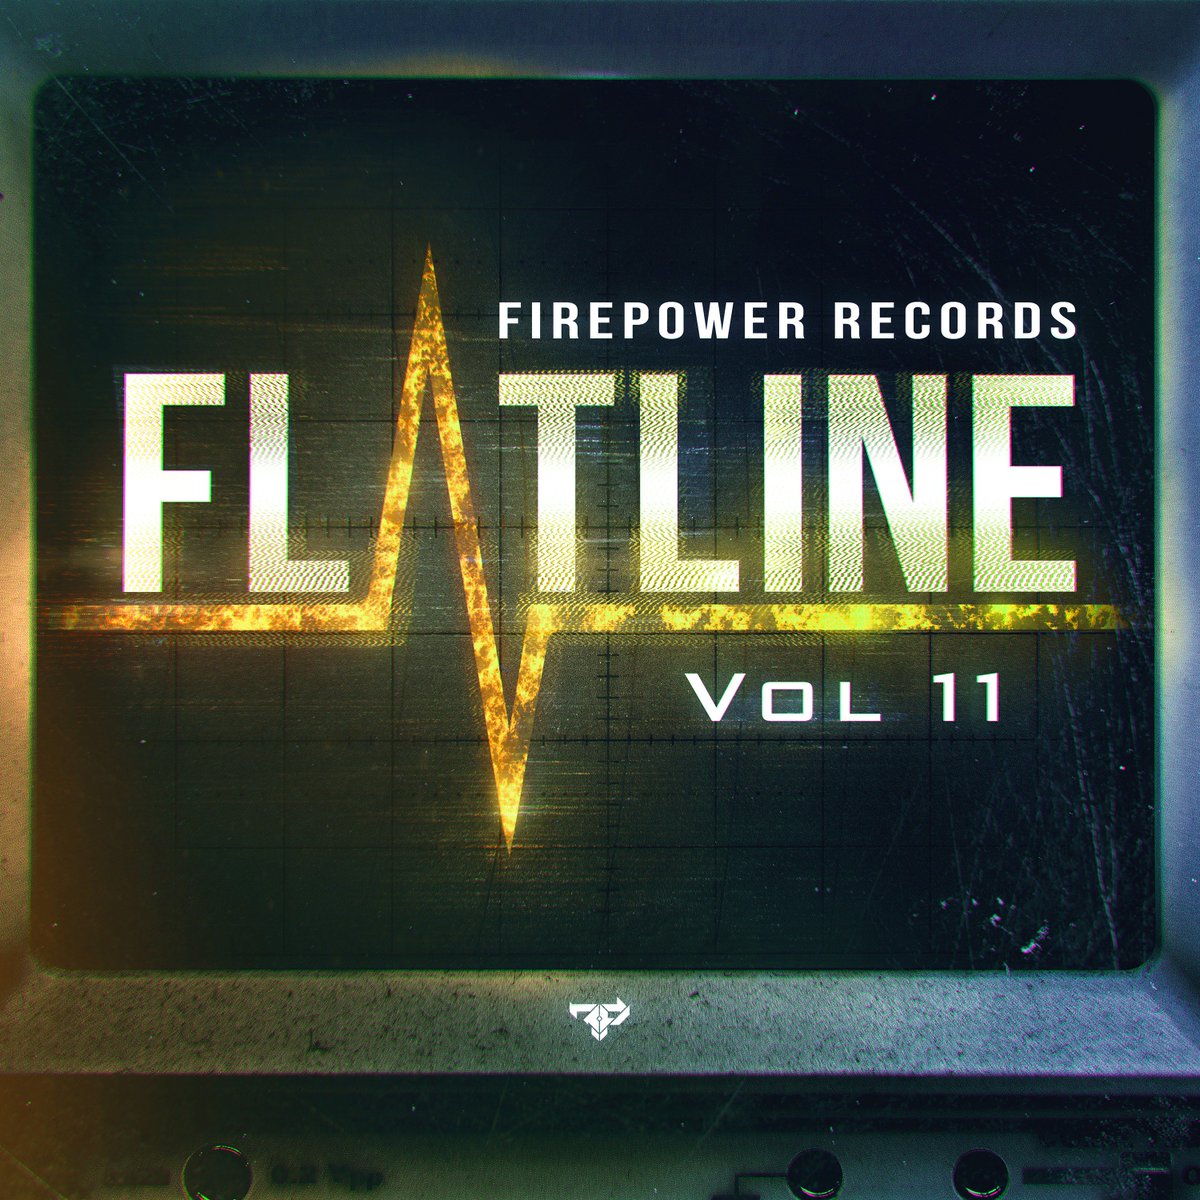 Spicy things incoming with my dude @INF1N1TEMUSIC on @FirepowerRecs Flatline Vol 11 out November 30th 💣 'Fall For You' is a tune! Can't wait for you all to hear it